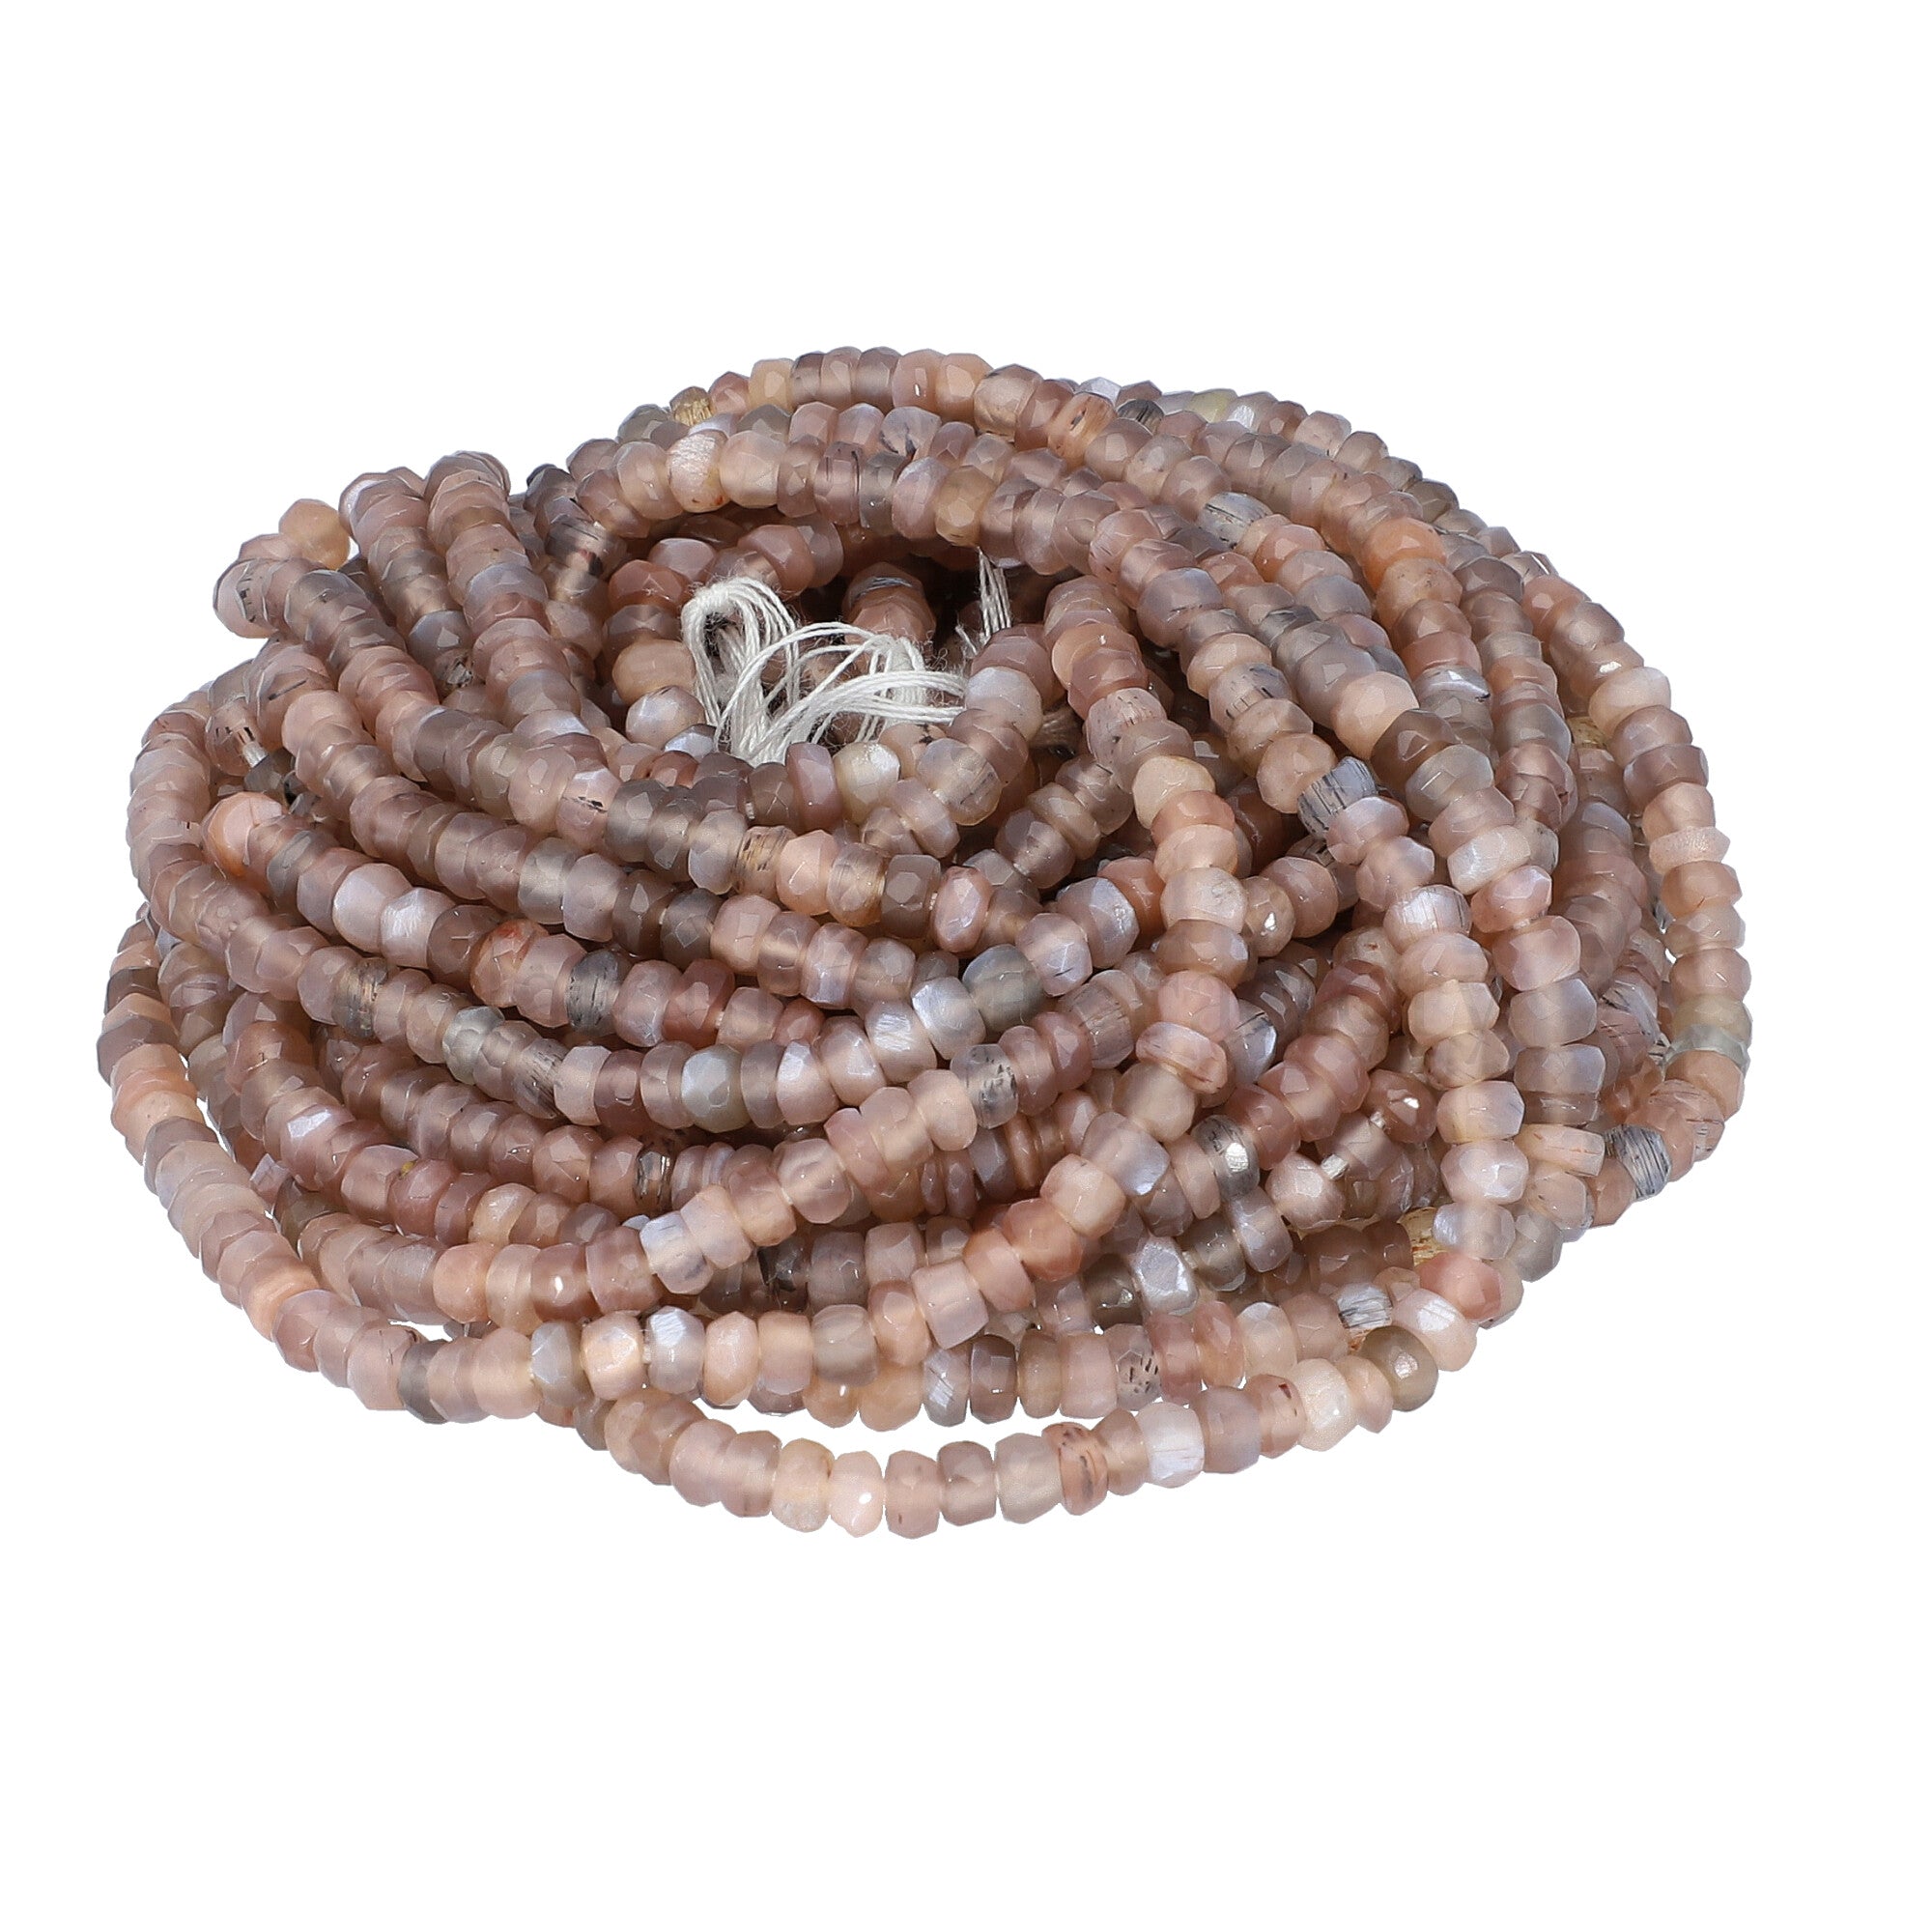 Brown Chocolate Moonstone 4 To 4.5 MM Faceted Rondelle Shape Beads Strand 1mm Drill